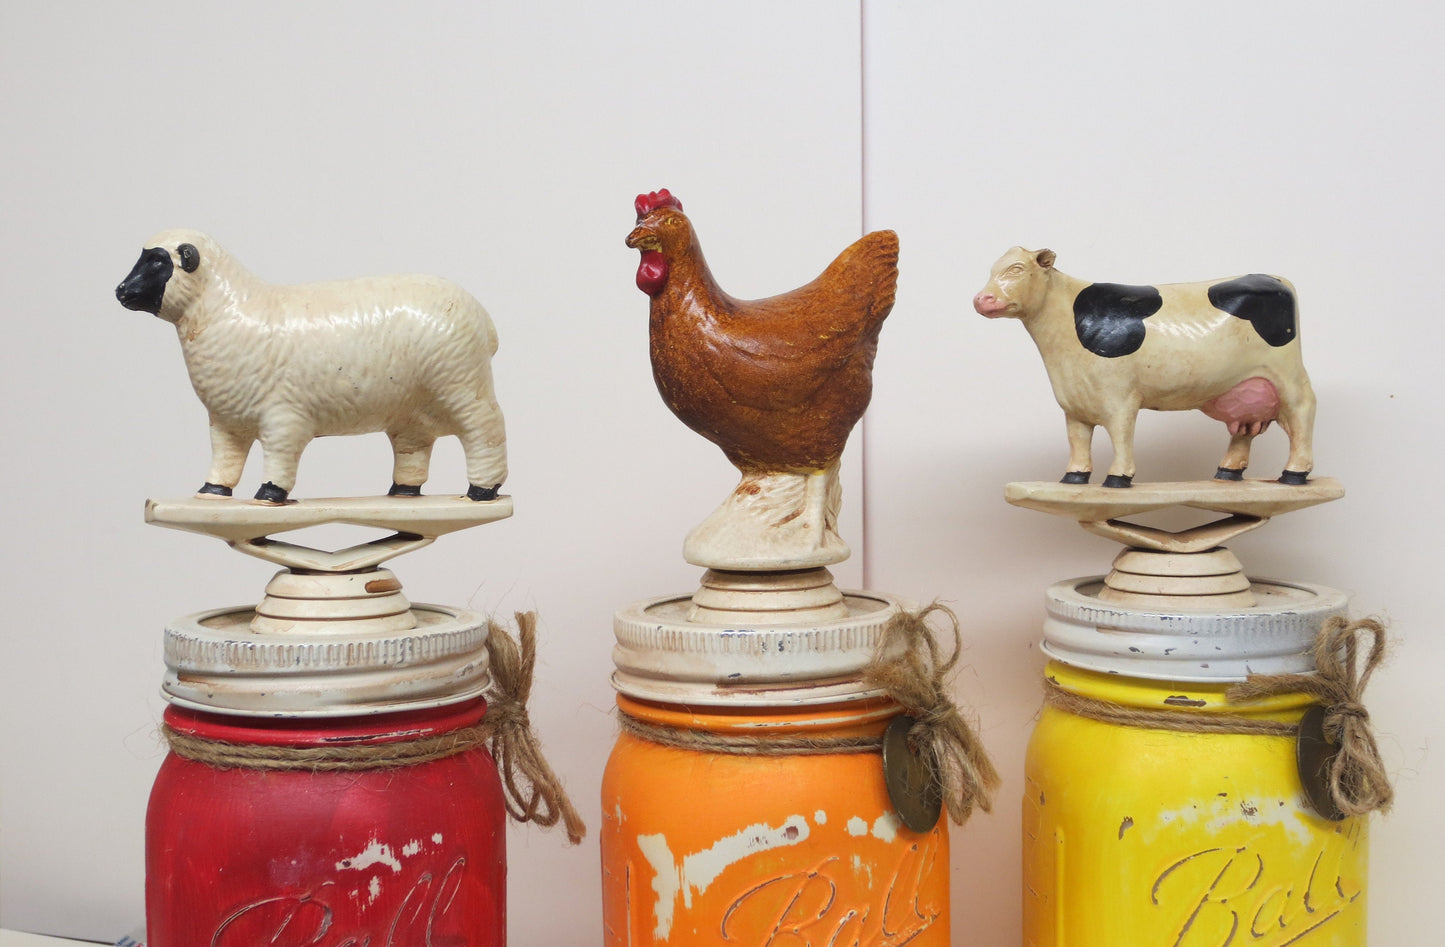 Mason Jars Baby Shower Baby Sprinkle Rustic Decor Primary Colors Hand Painted Farm Animals Chicken Cow Sheep Baby Nursery Decor Centerpiece